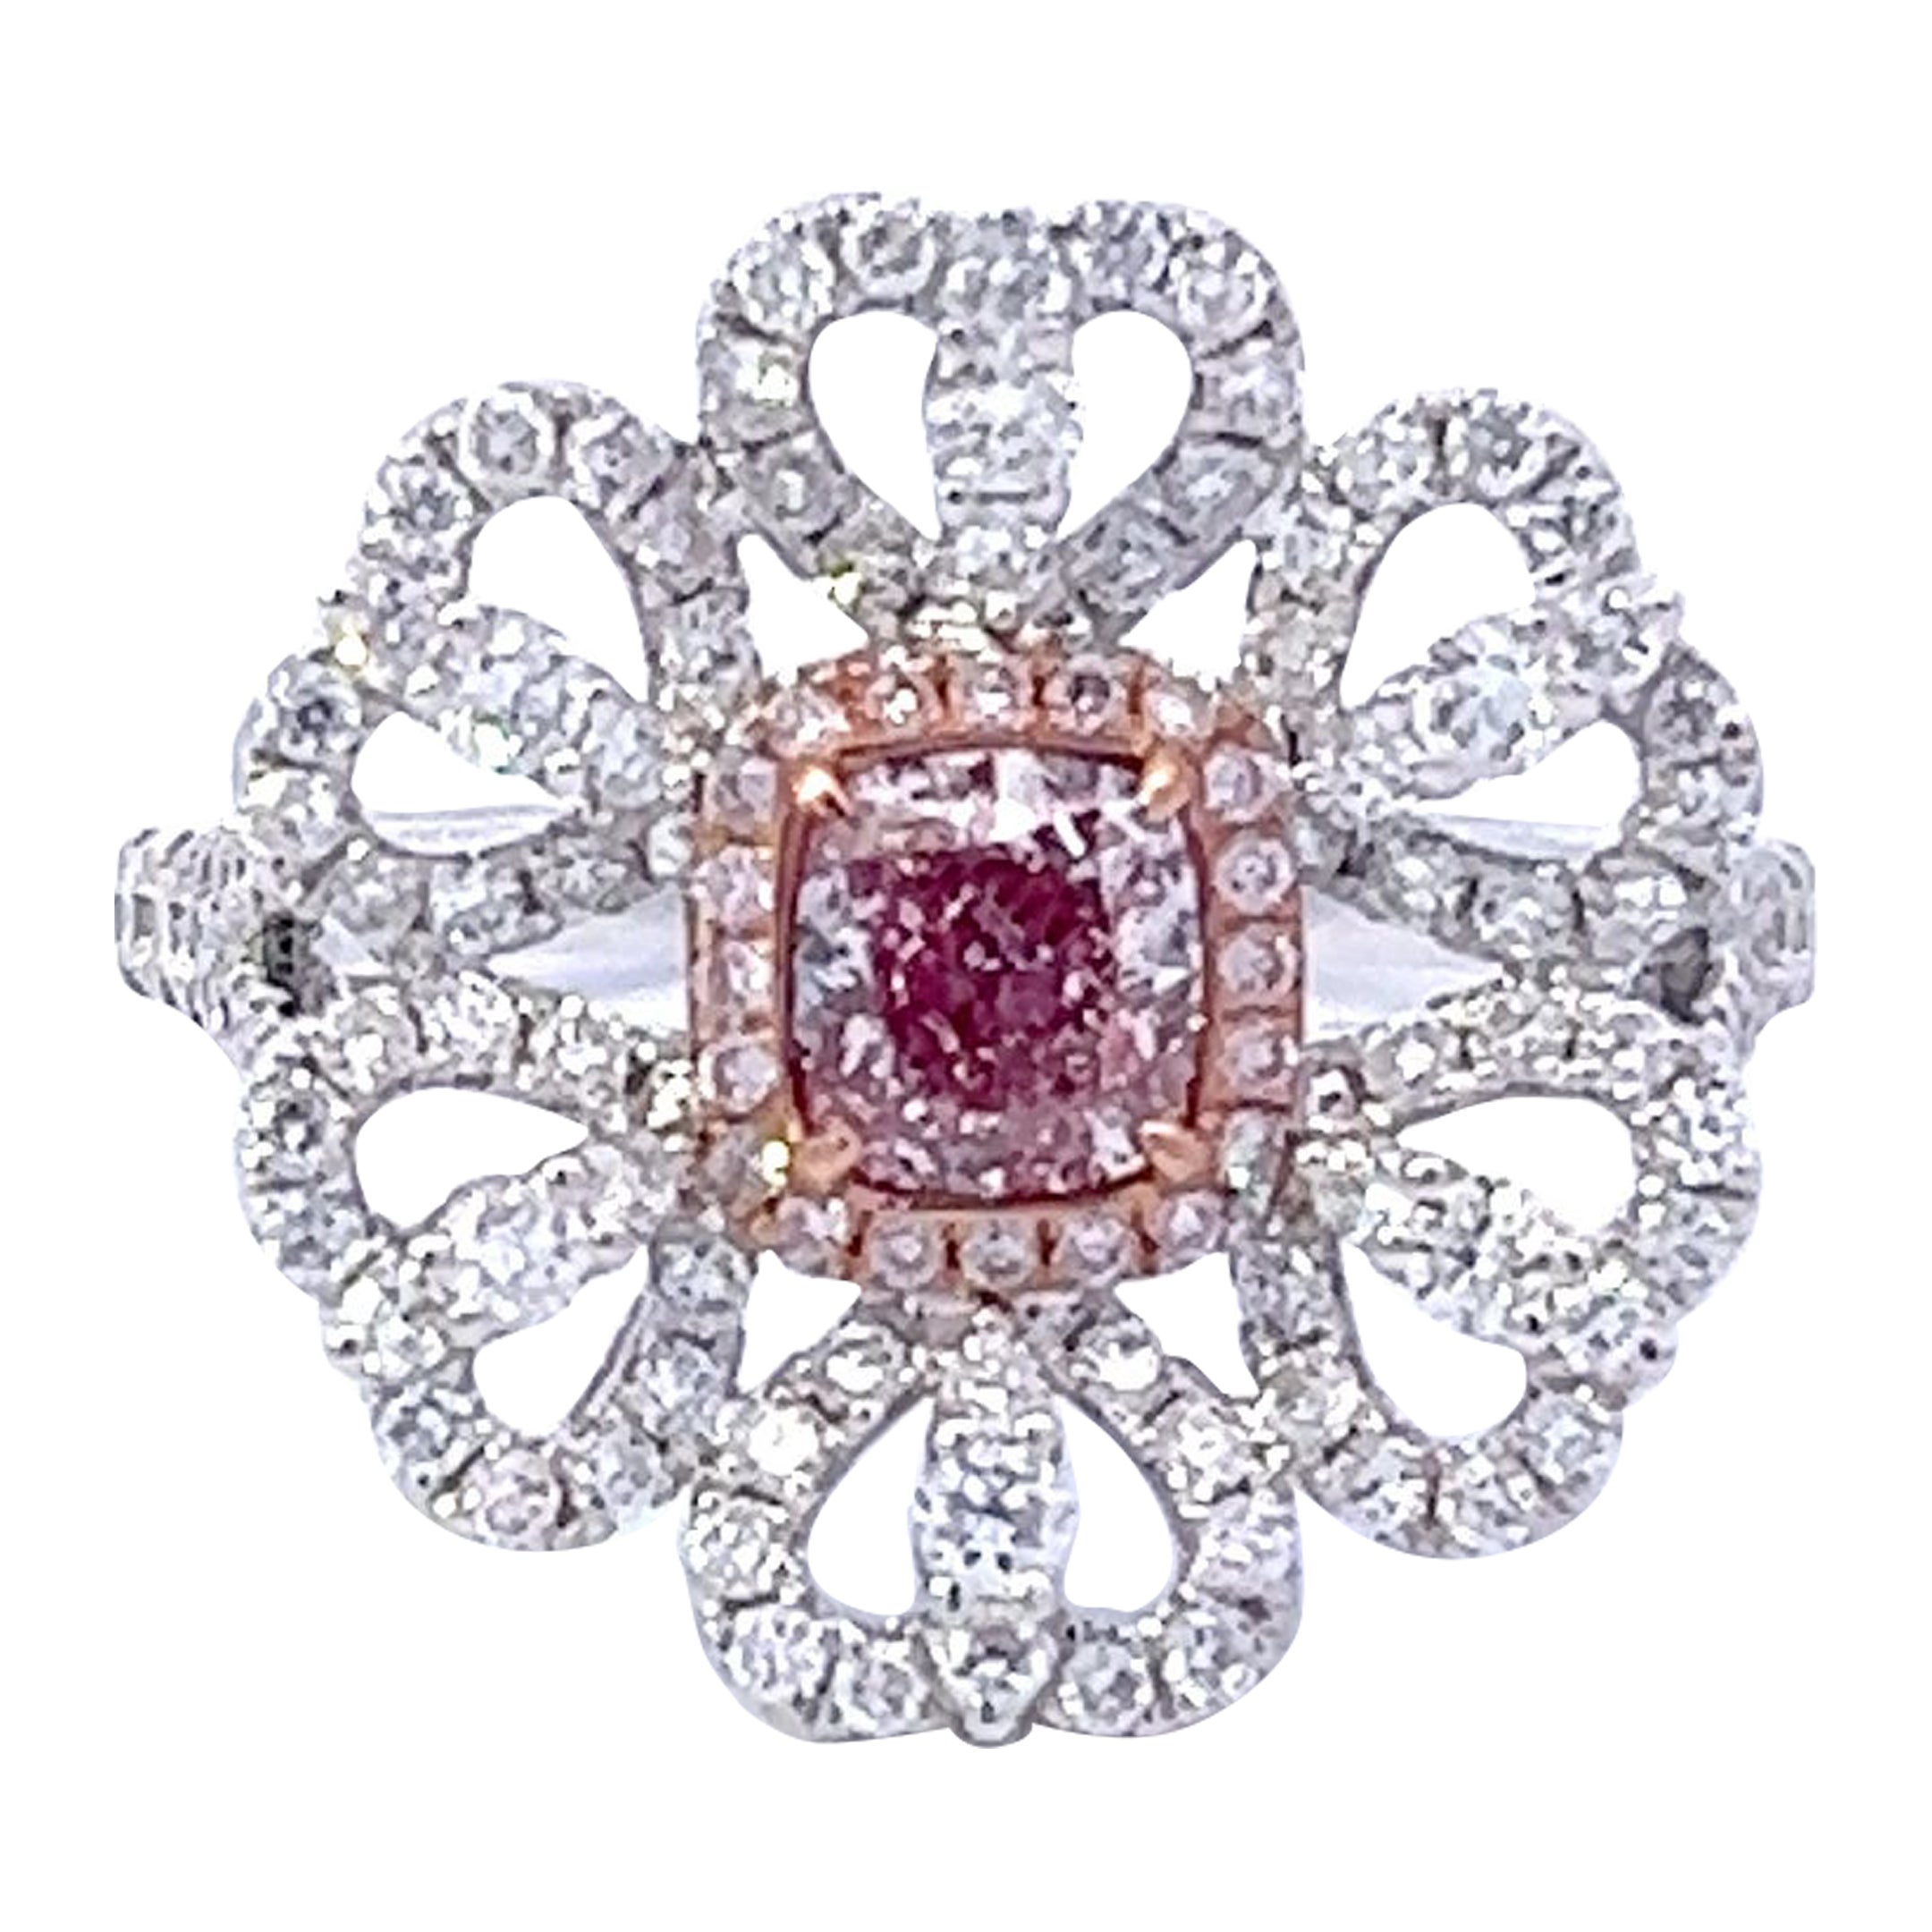 GIA Certified 0.59 Carat Light Pink Diamond Ring For Sale